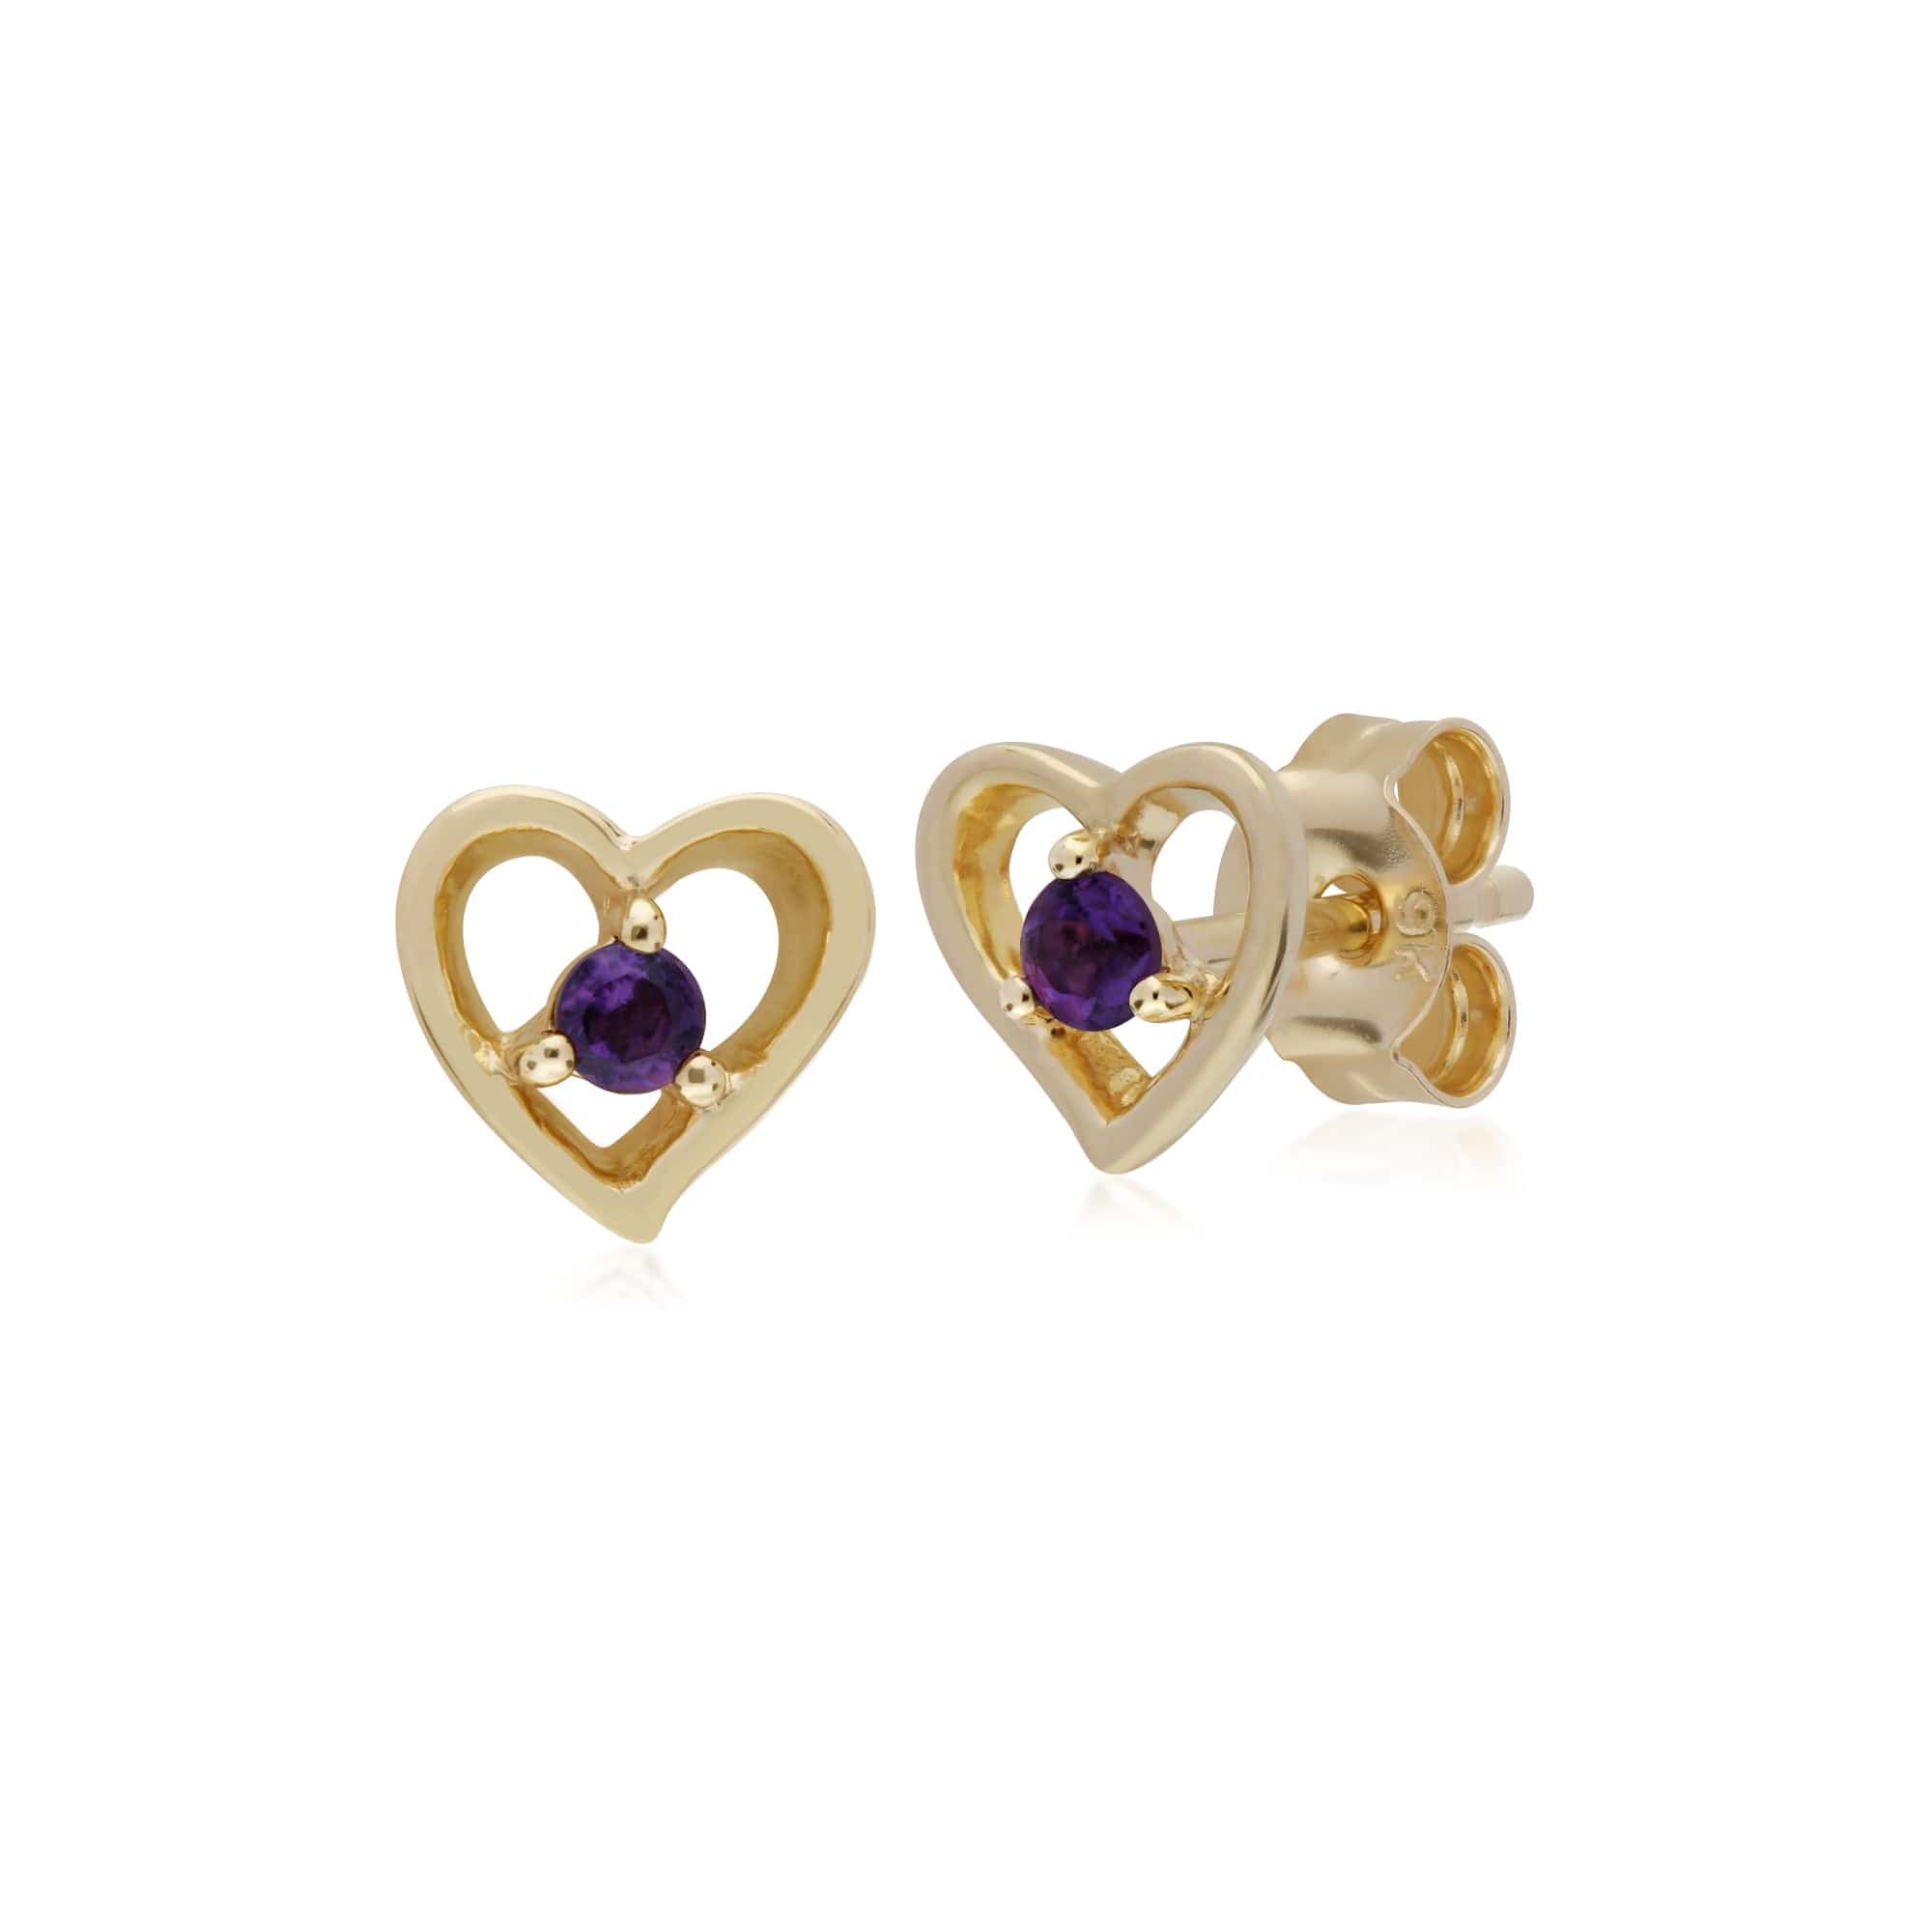 135E1521059-135P1875049 Classic Round Amethyst Single Stone Heart Stud Earrings & Necklace Set in 9ct Yellow Gold 2